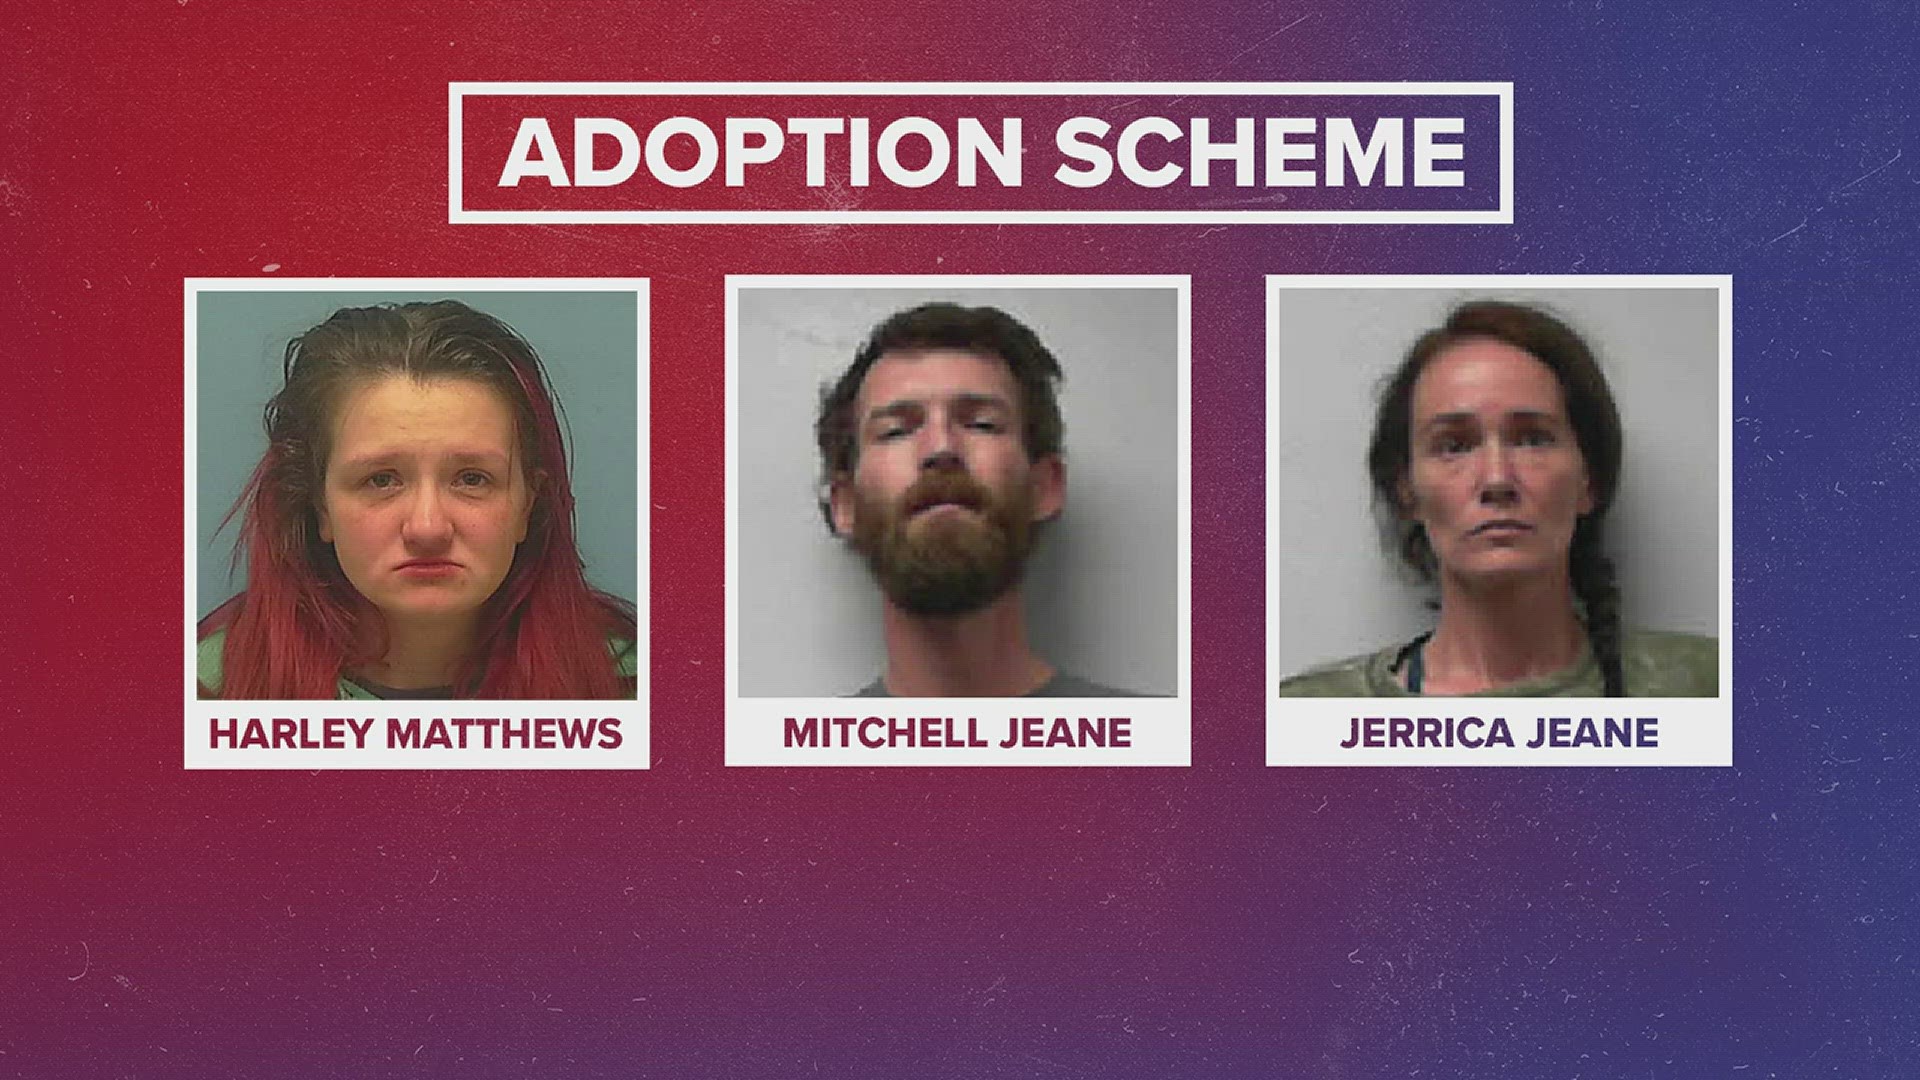 The money she allegedly received was not for any type of lawful adoption purpose according to the indictment.